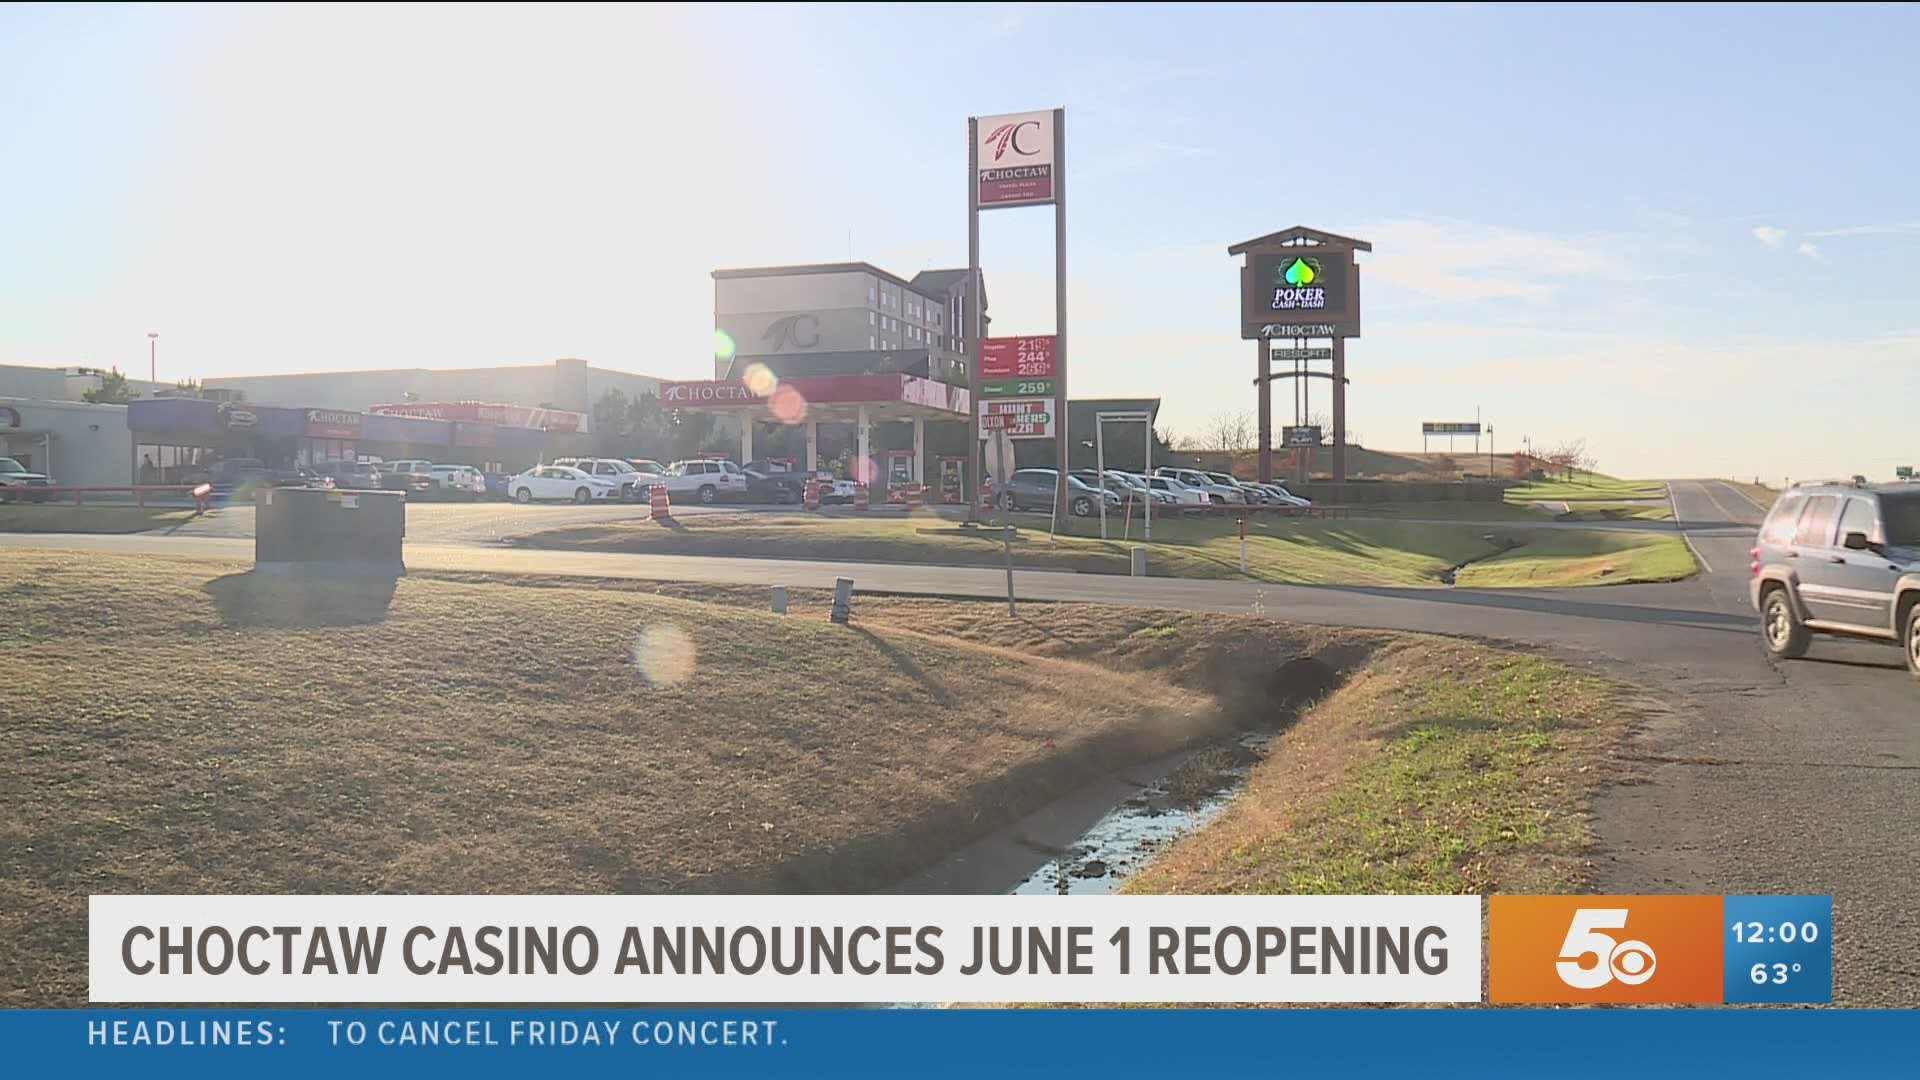 Choctaw casino reopen date